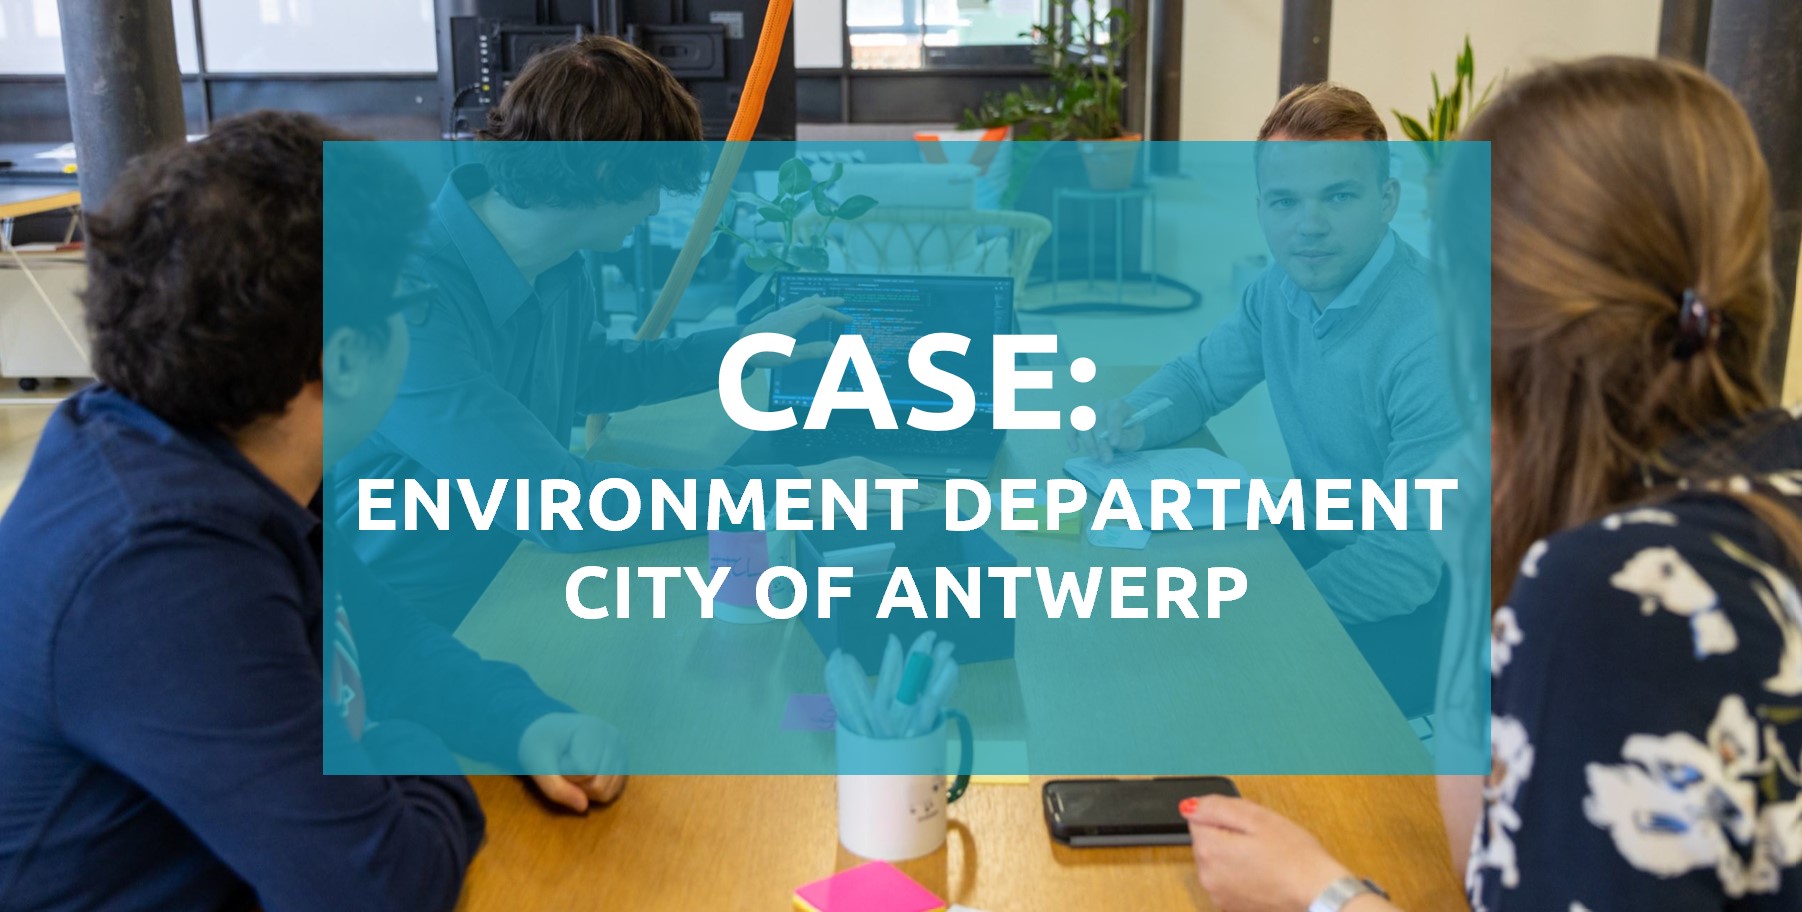 City of Antwerp’s Environment Department takes the next step in digital customer follow-up thanks to Salesforce Service Cloud